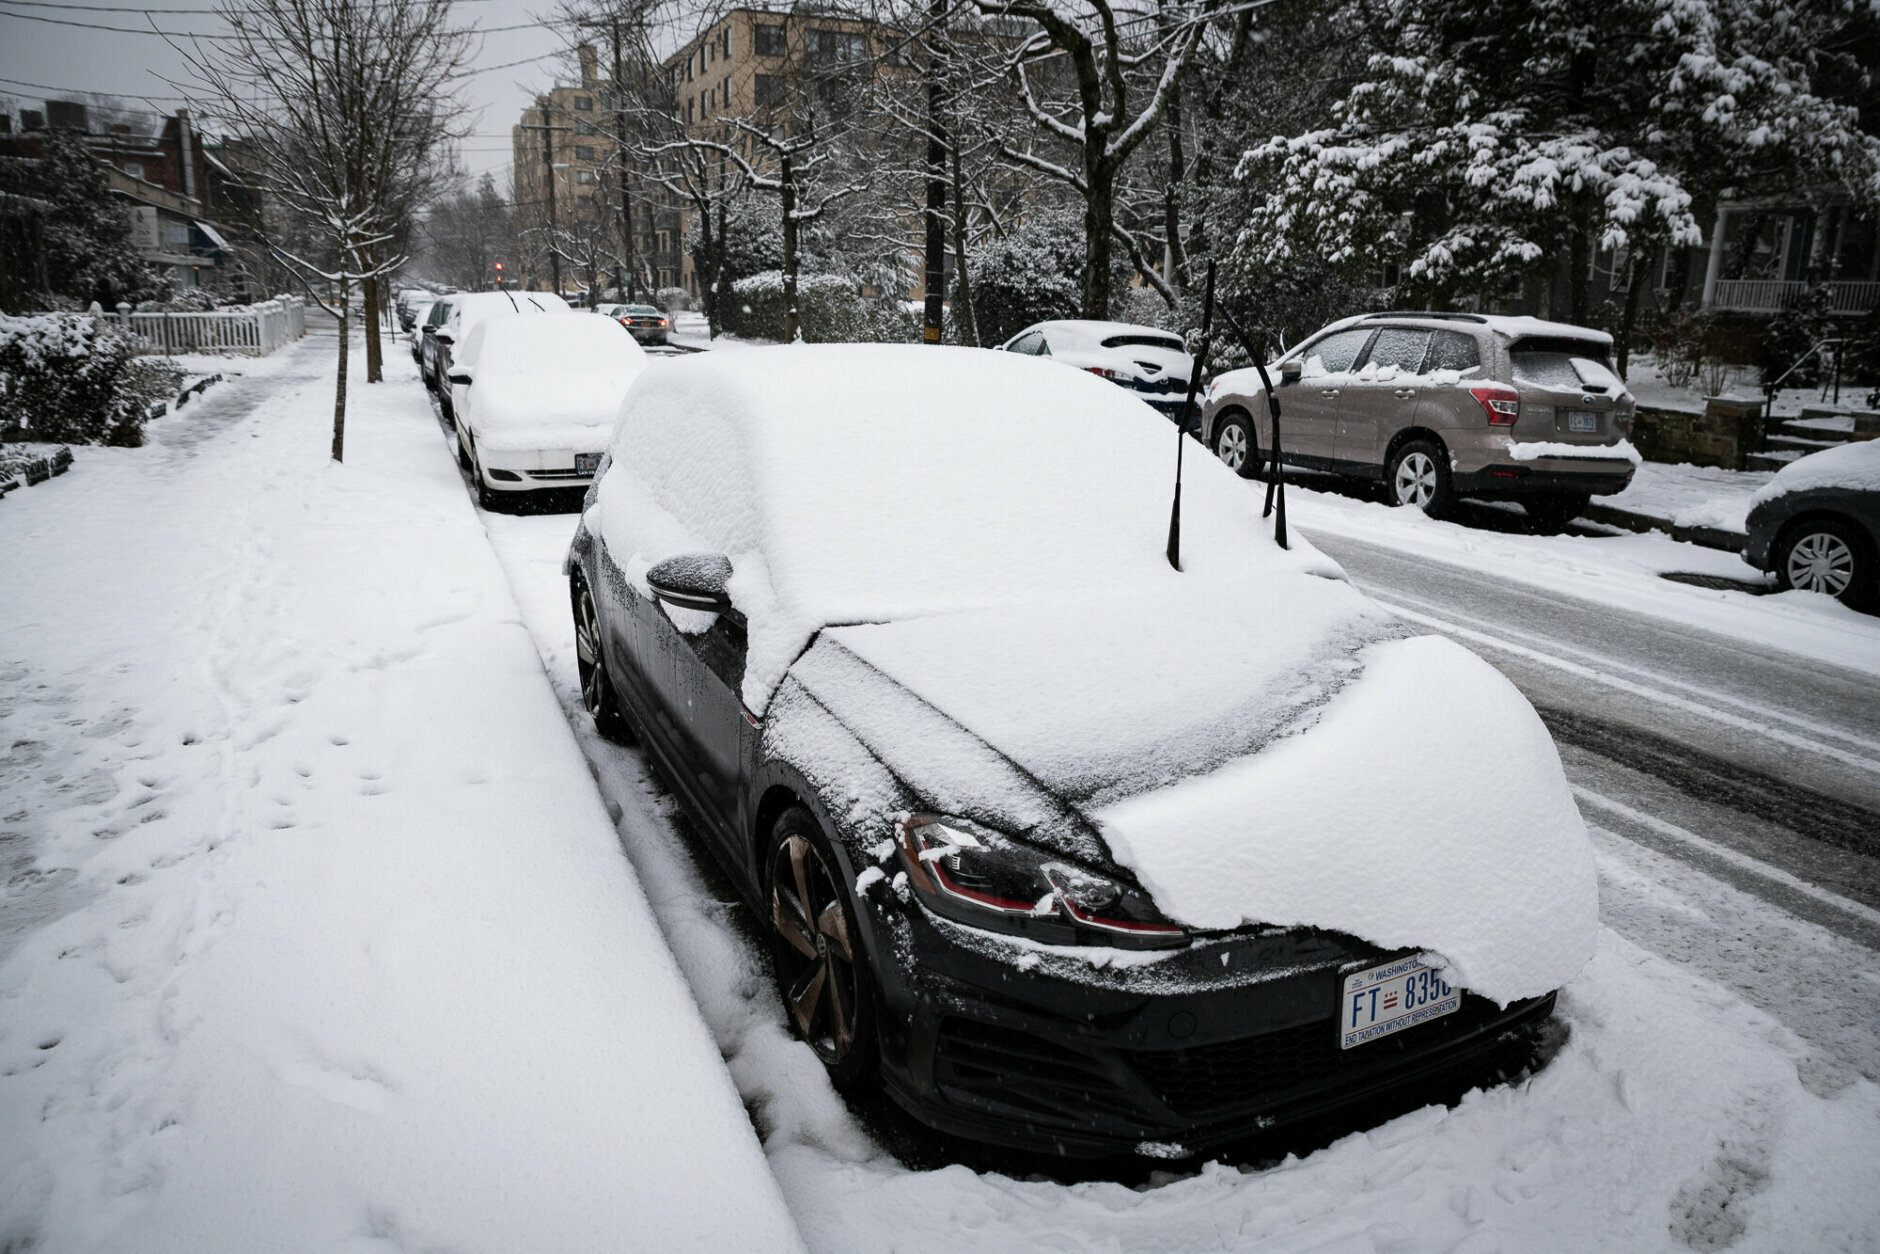 Storm warning issued for Washington DC; 10+ inches of snow